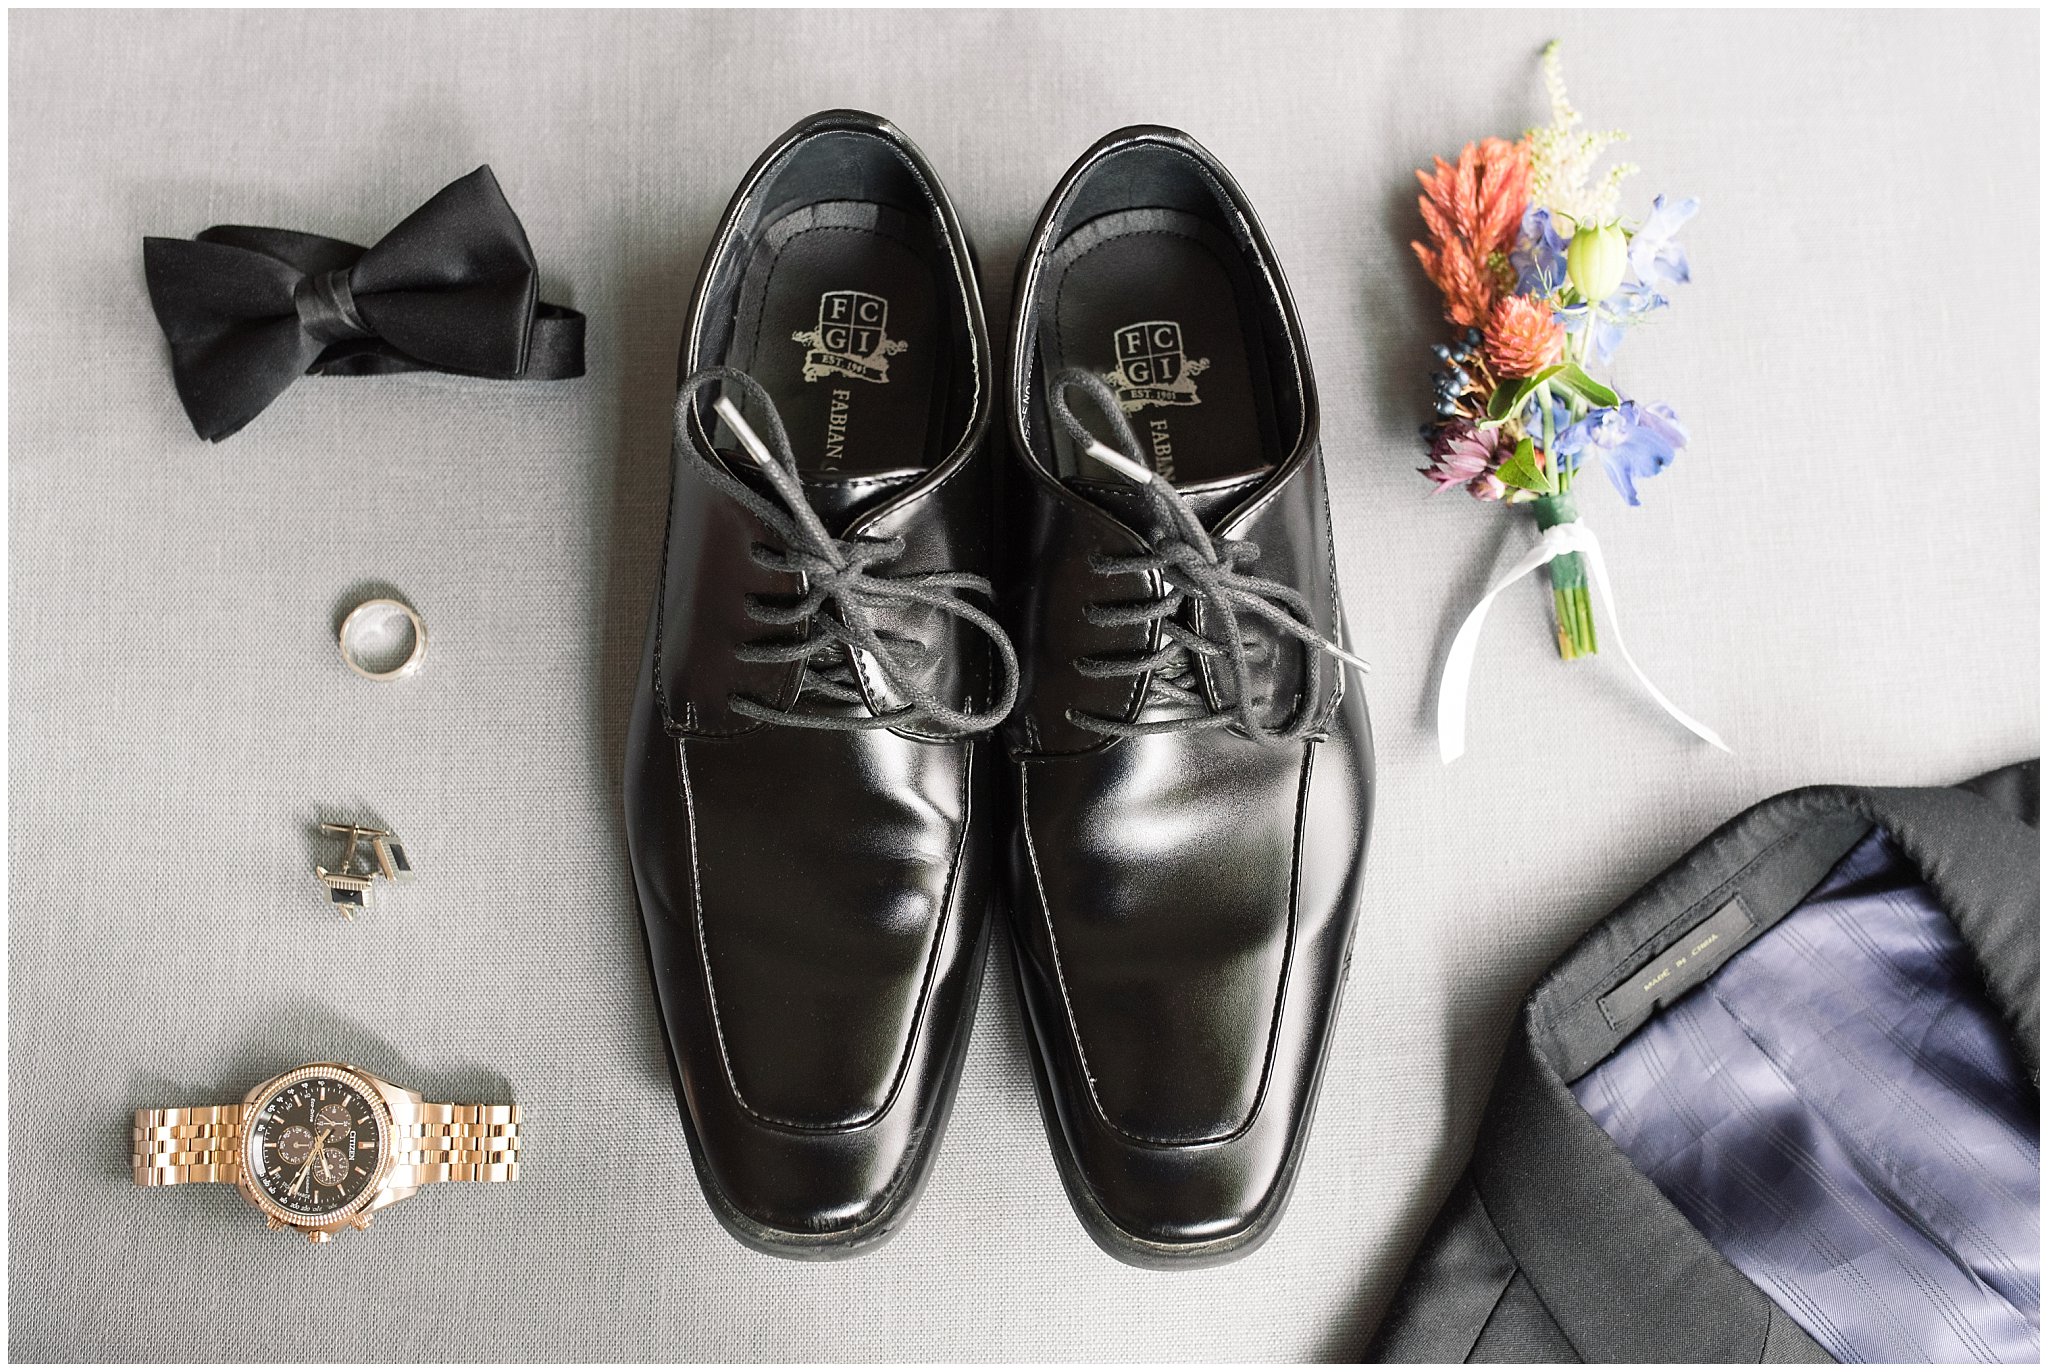 Groom details with watch, black leather shoes, and boutonniere | Top Utah Wedding and Couples Photos 2019 | Jessie and Dallin Photography